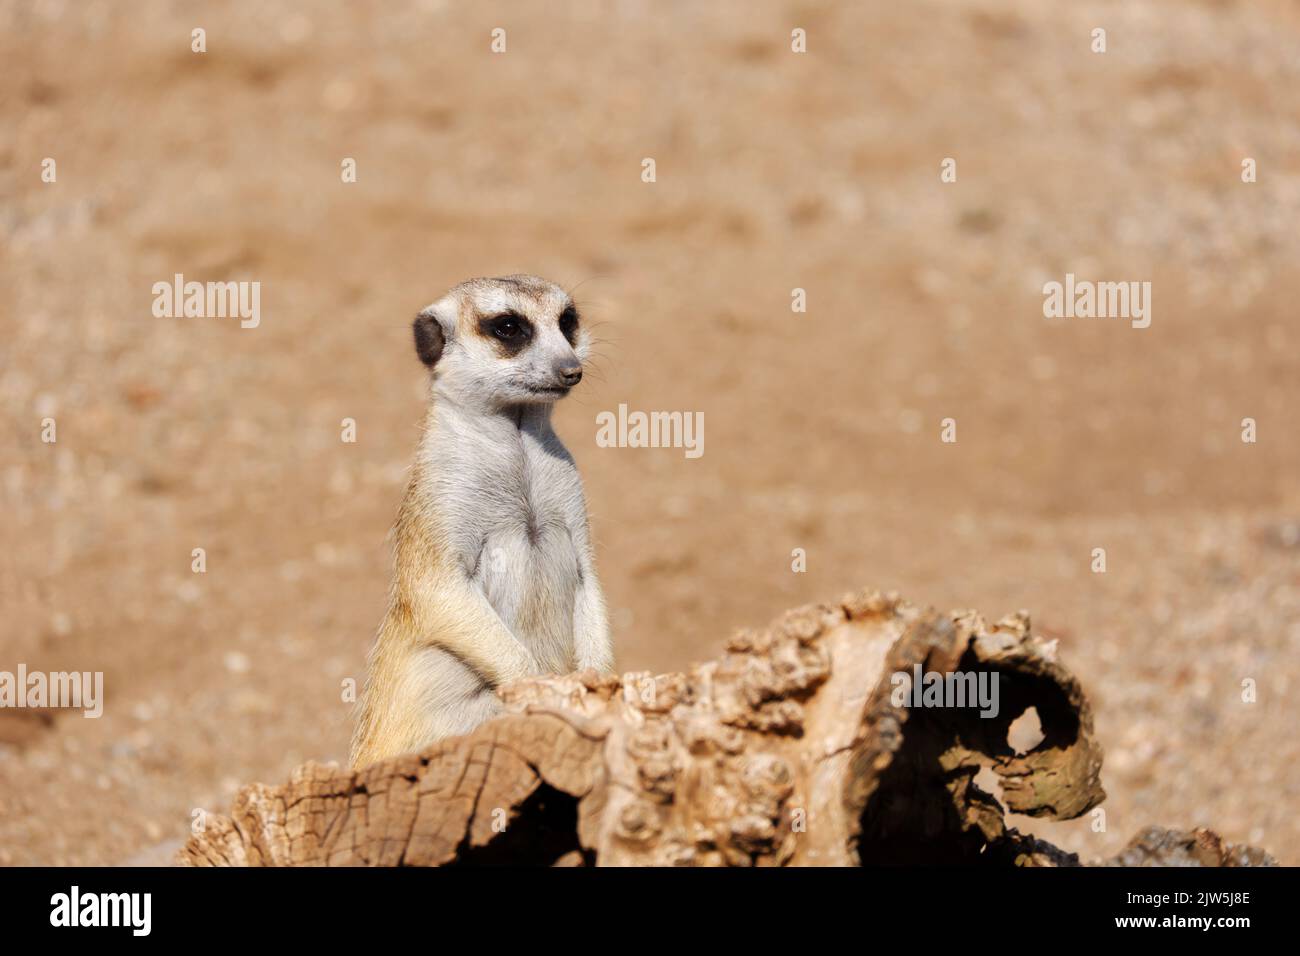 Meerkat standing at observing position at sandy land near wood Stock Photo